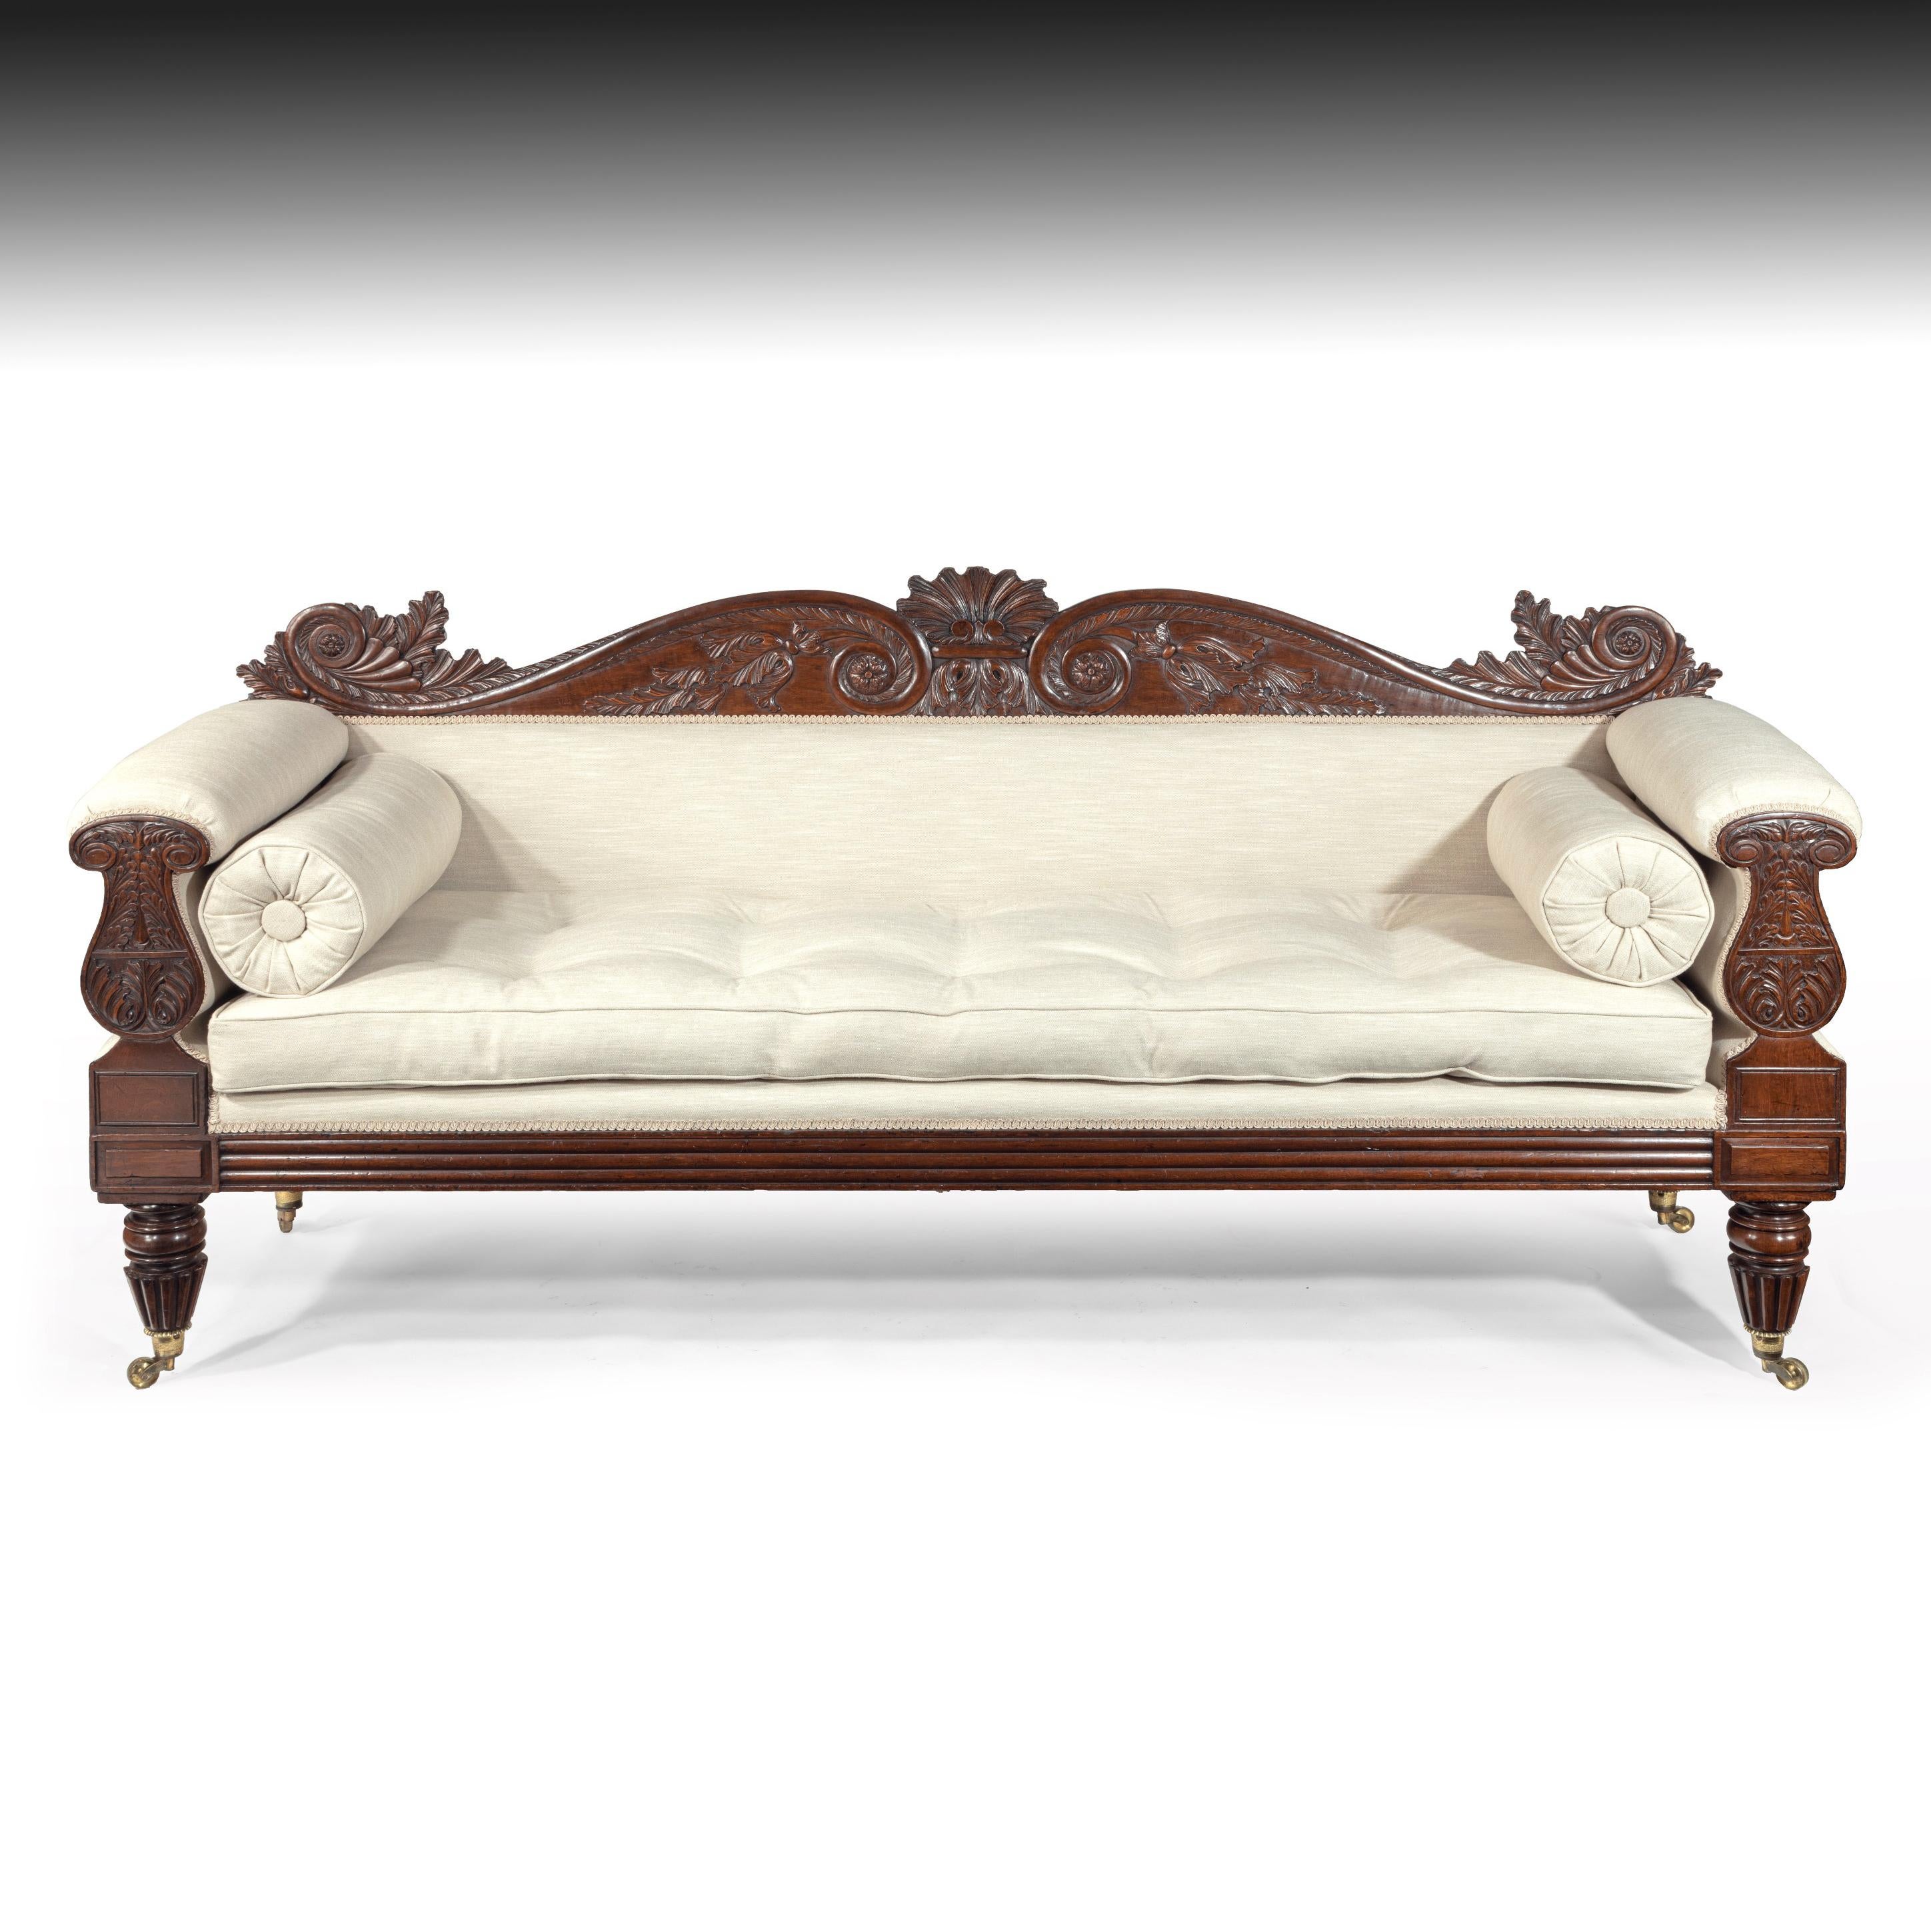 English Fine Late Regency Sofa after a Design by John Taylor